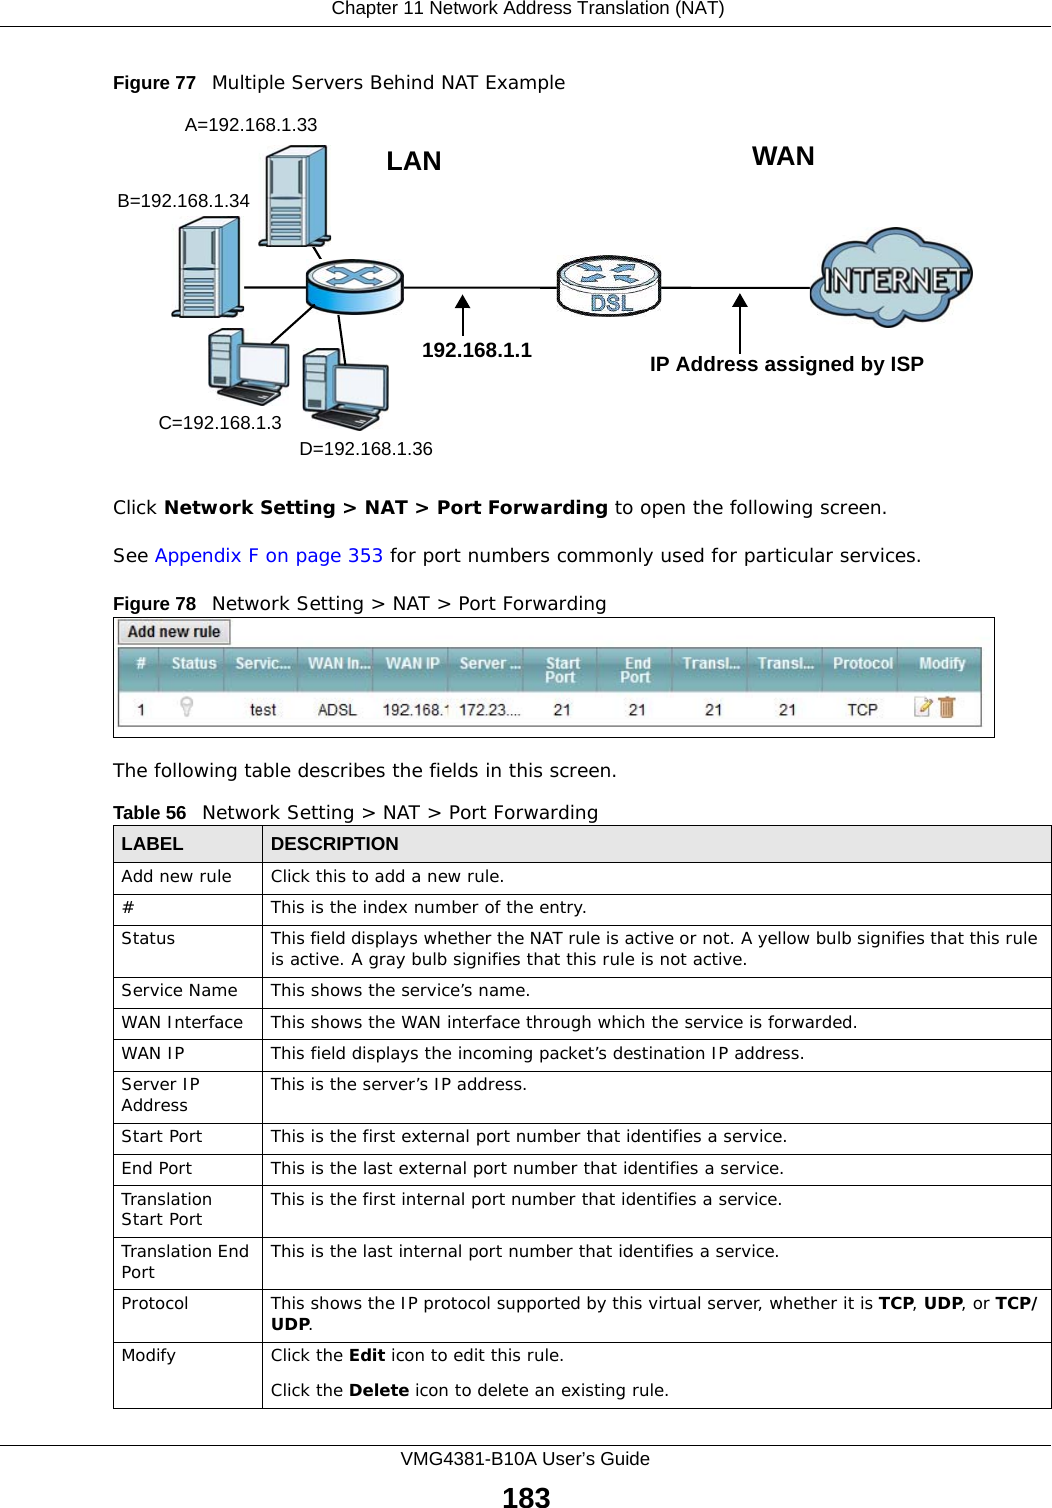  Chapter 11 Network Address Translation (NAT)VMG4381-B10A User’s Guide183Figure 77   Multiple Servers Behind NAT ExampleClick Network Setting &gt; NAT &gt; Port Forwarding to open the following screen.See Appendix F on page 353 for port numbers commonly used for particular services. Figure 78   Network Setting &gt; NAT &gt; Port ForwardingThe following table describes the fields in this screen. Table 56   Network Setting &gt; NAT &gt; Port ForwardingLABEL DESCRIPTIONAdd new rule Click this to add a new rule.#This is the index number of the entry.Status This field displays whether the NAT rule is active or not. A yellow bulb signifies that this rule is active. A gray bulb signifies that this rule is not active.Service Name This shows the service’s name.WAN Interface This shows the WAN interface through which the service is forwarded.WAN IP This field displays the incoming packet’s destination IP address.Server IP Address This is the server’s IP address.Start Port  This is the first external port number that identifies a service.End Port  This is the last external port number that identifies a service.Translation Start Port  This is the first internal port number that identifies a service.Translation End Port  This is the last internal port number that identifies a service.Protocol This shows the IP protocol supported by this virtual server, whether it is TCP, UDP, or TCP/UDP.Modify Click the Edit icon to edit this rule.Click the Delete icon to delete an existing rule. A=192.168.1.33D=192.168.1.36C=192.168.1.3B=192.168.1.34WANLAN192.168.1.1 IP Address assigned by ISP